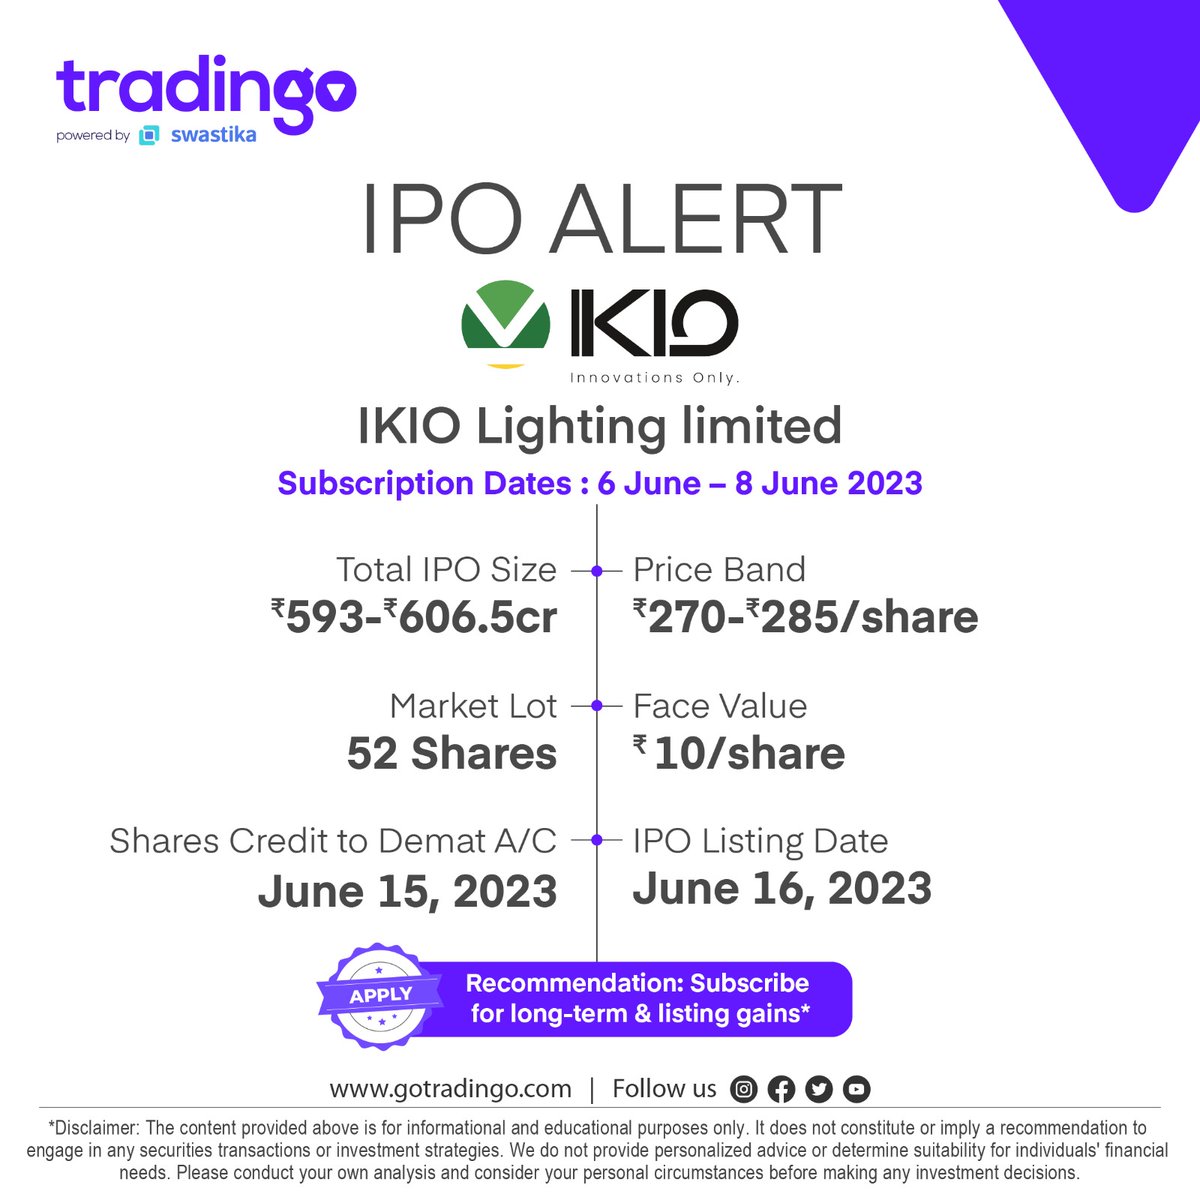 IPO Alert : IKIO Lighting Limited IPO 

Click kyc.gotradingo.com/customer/login
To open a Demat and Trading Account 

Connect with us :
📞 (+91)9667658800
📧 helpdek@gotradingo.com 

#IPOAlert #InvestmentOpportunity #IPOInvesting #StockMarket #InitialPublicOffering